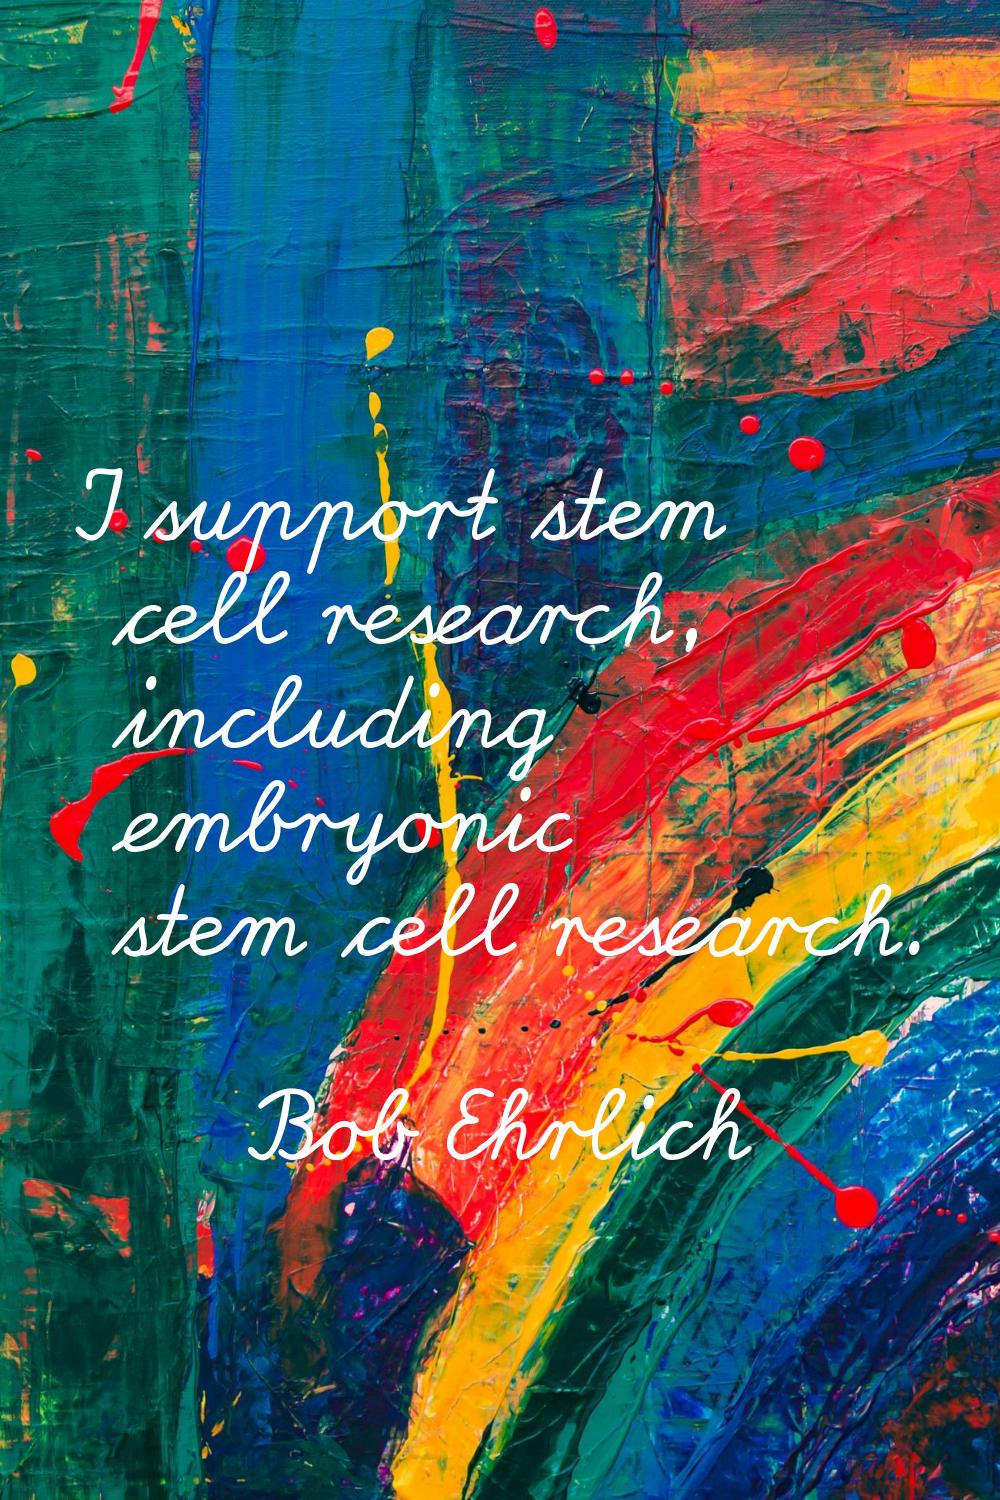 I support stem cell research, including embryonic stem cell research.